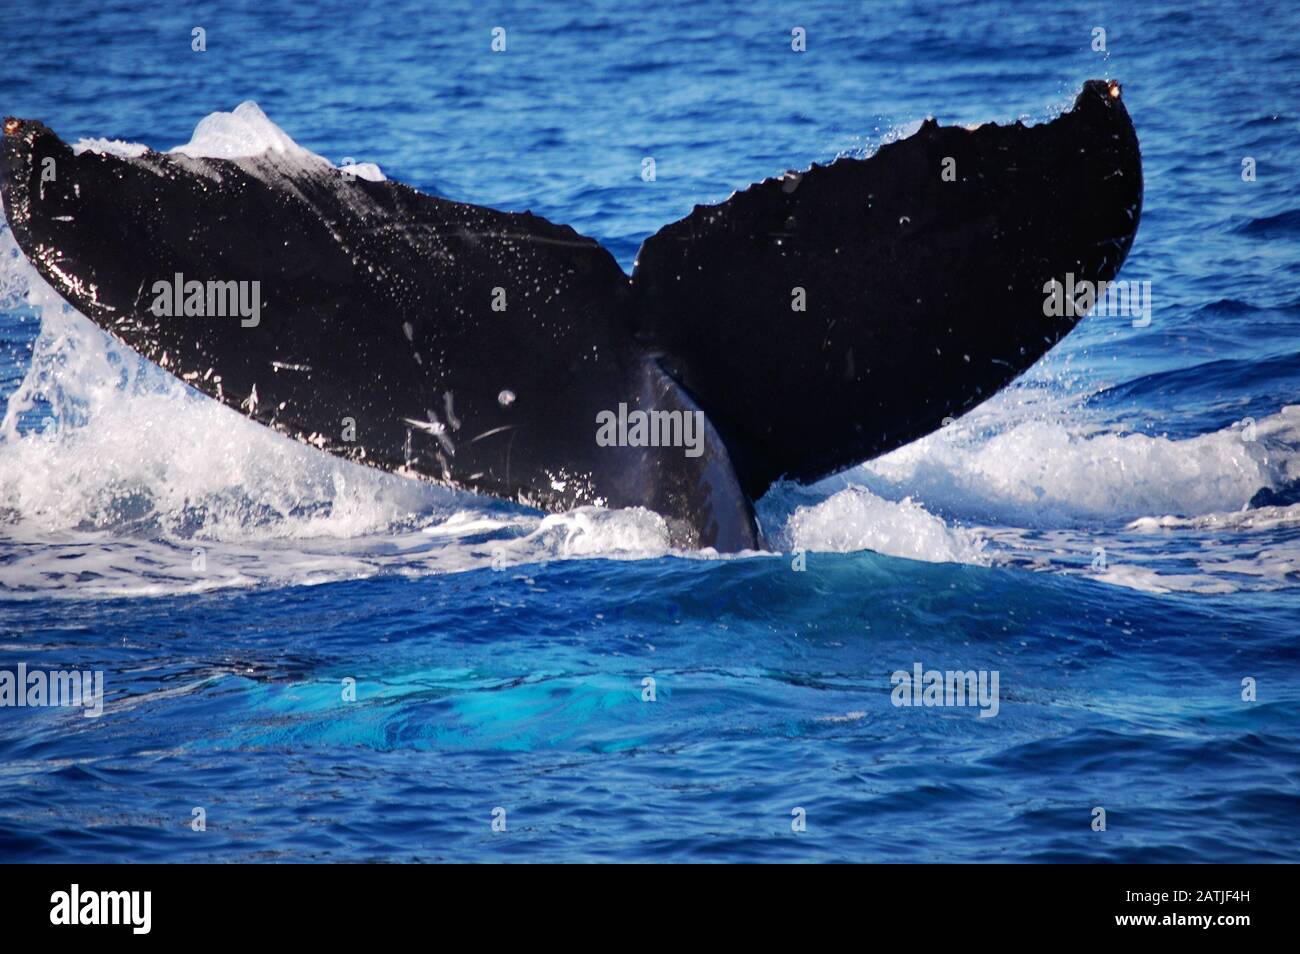 A  whale of a tail splashing in the ocean in Maui, Hawaii. Stock Photo